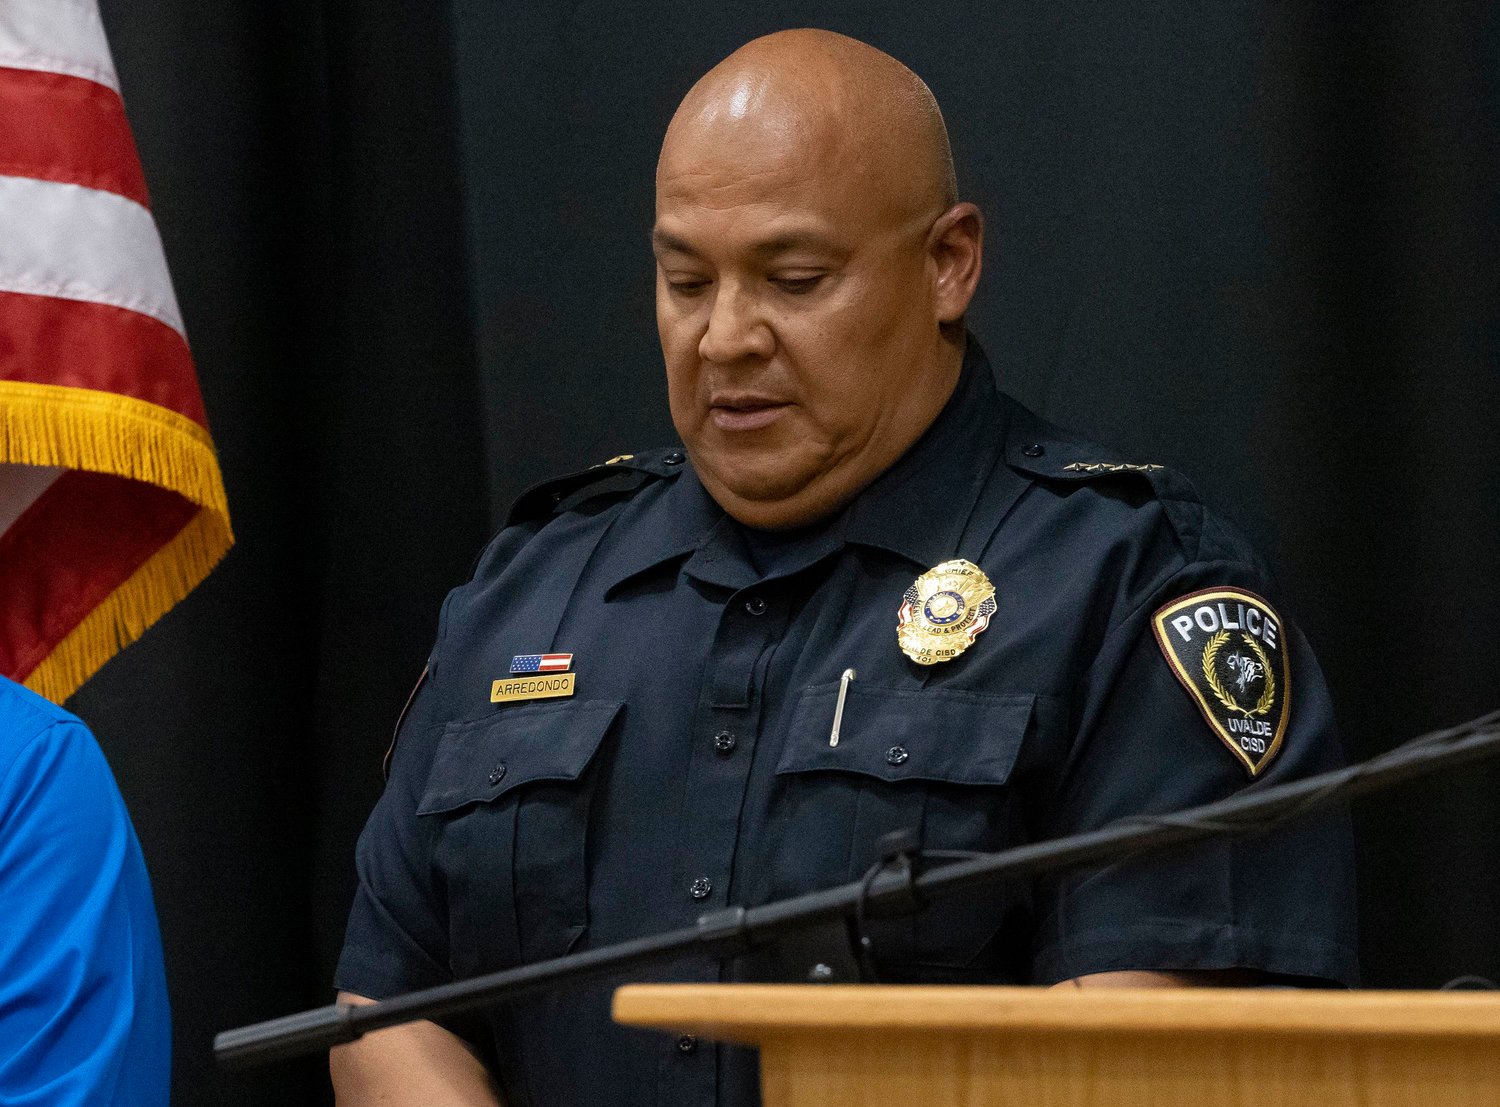 Uvalde schools police Chief Pedro "Pete" Arredondo listens during a news conference at Uvalde County Fairplex after 19 students and two teachers were killed in the shooting at Robb Elementary School on May 24, 2022, in Uvalde, Texas. Arredondo has been placed on administrative leave. (Juan Figueroa/The Dallas Morning News/TNS)